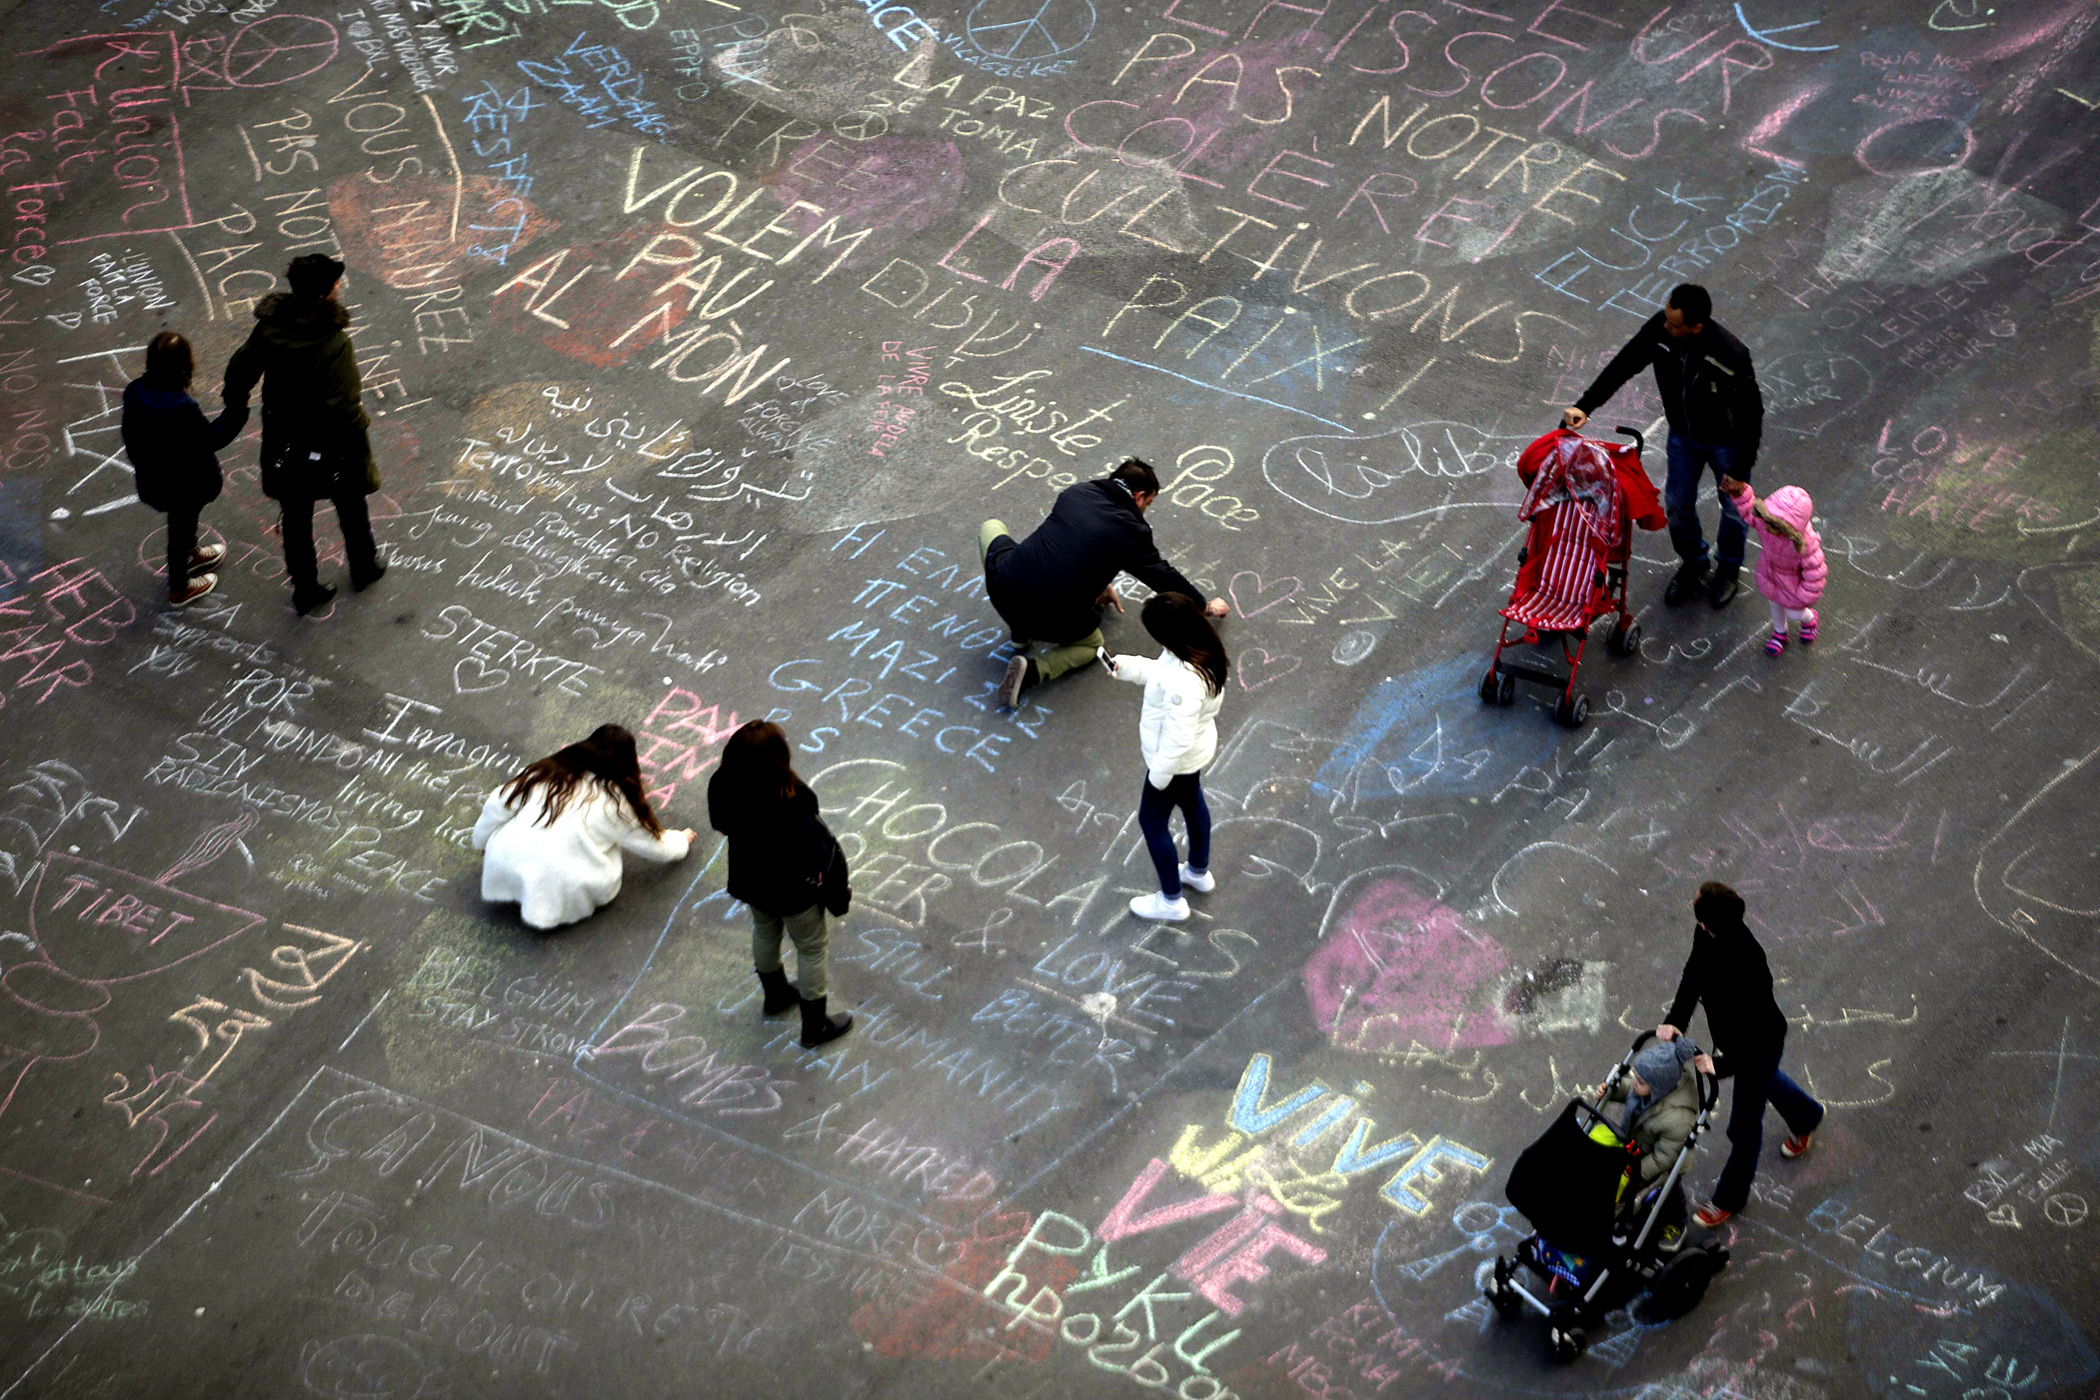 People write messages in chalk at Place de la Bourse following attacks in Brussels, Belgium, March 22, 2016.